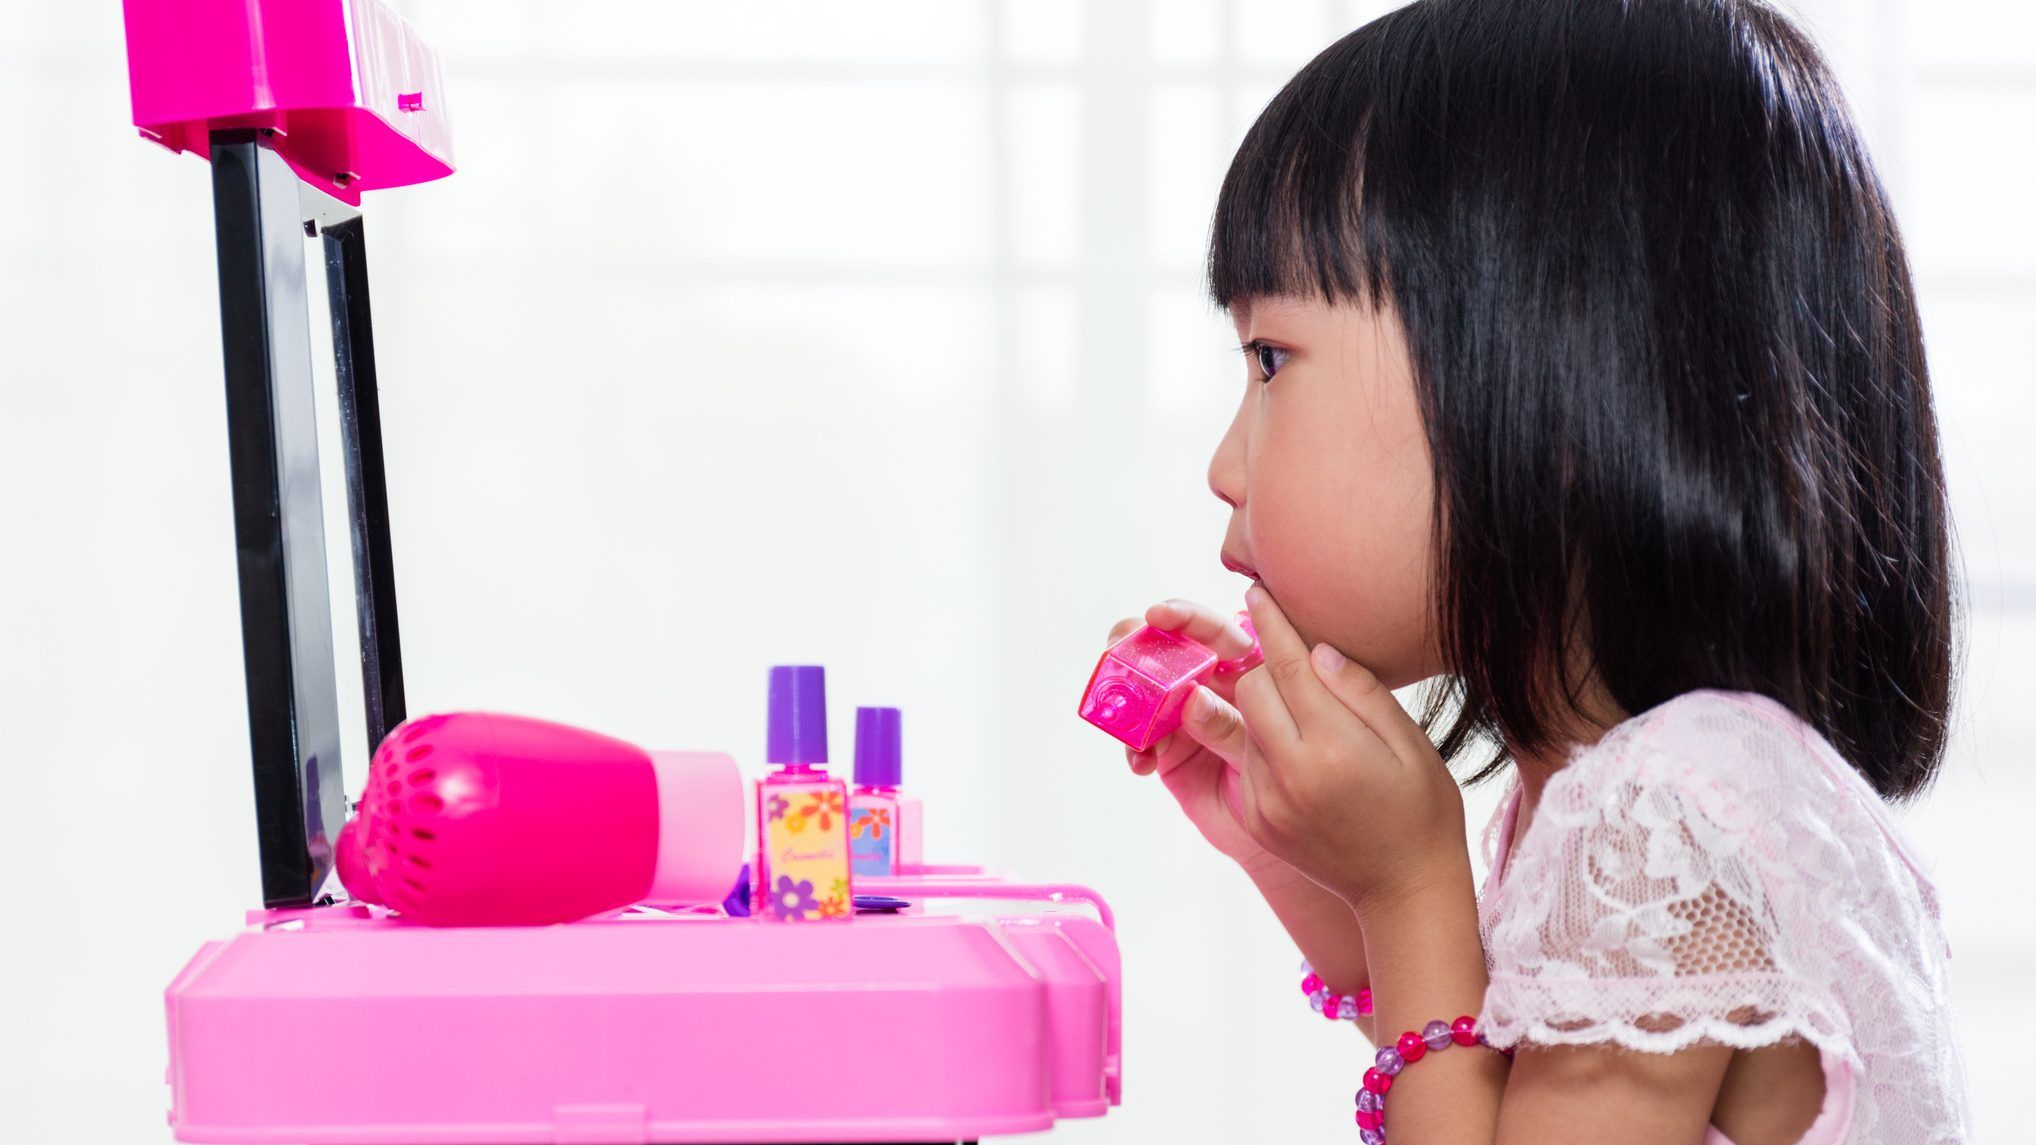 “Unfortunately, currently little is being done at the federal level to protect children from toxic chemicals in children's makeup and body products.” GETTY